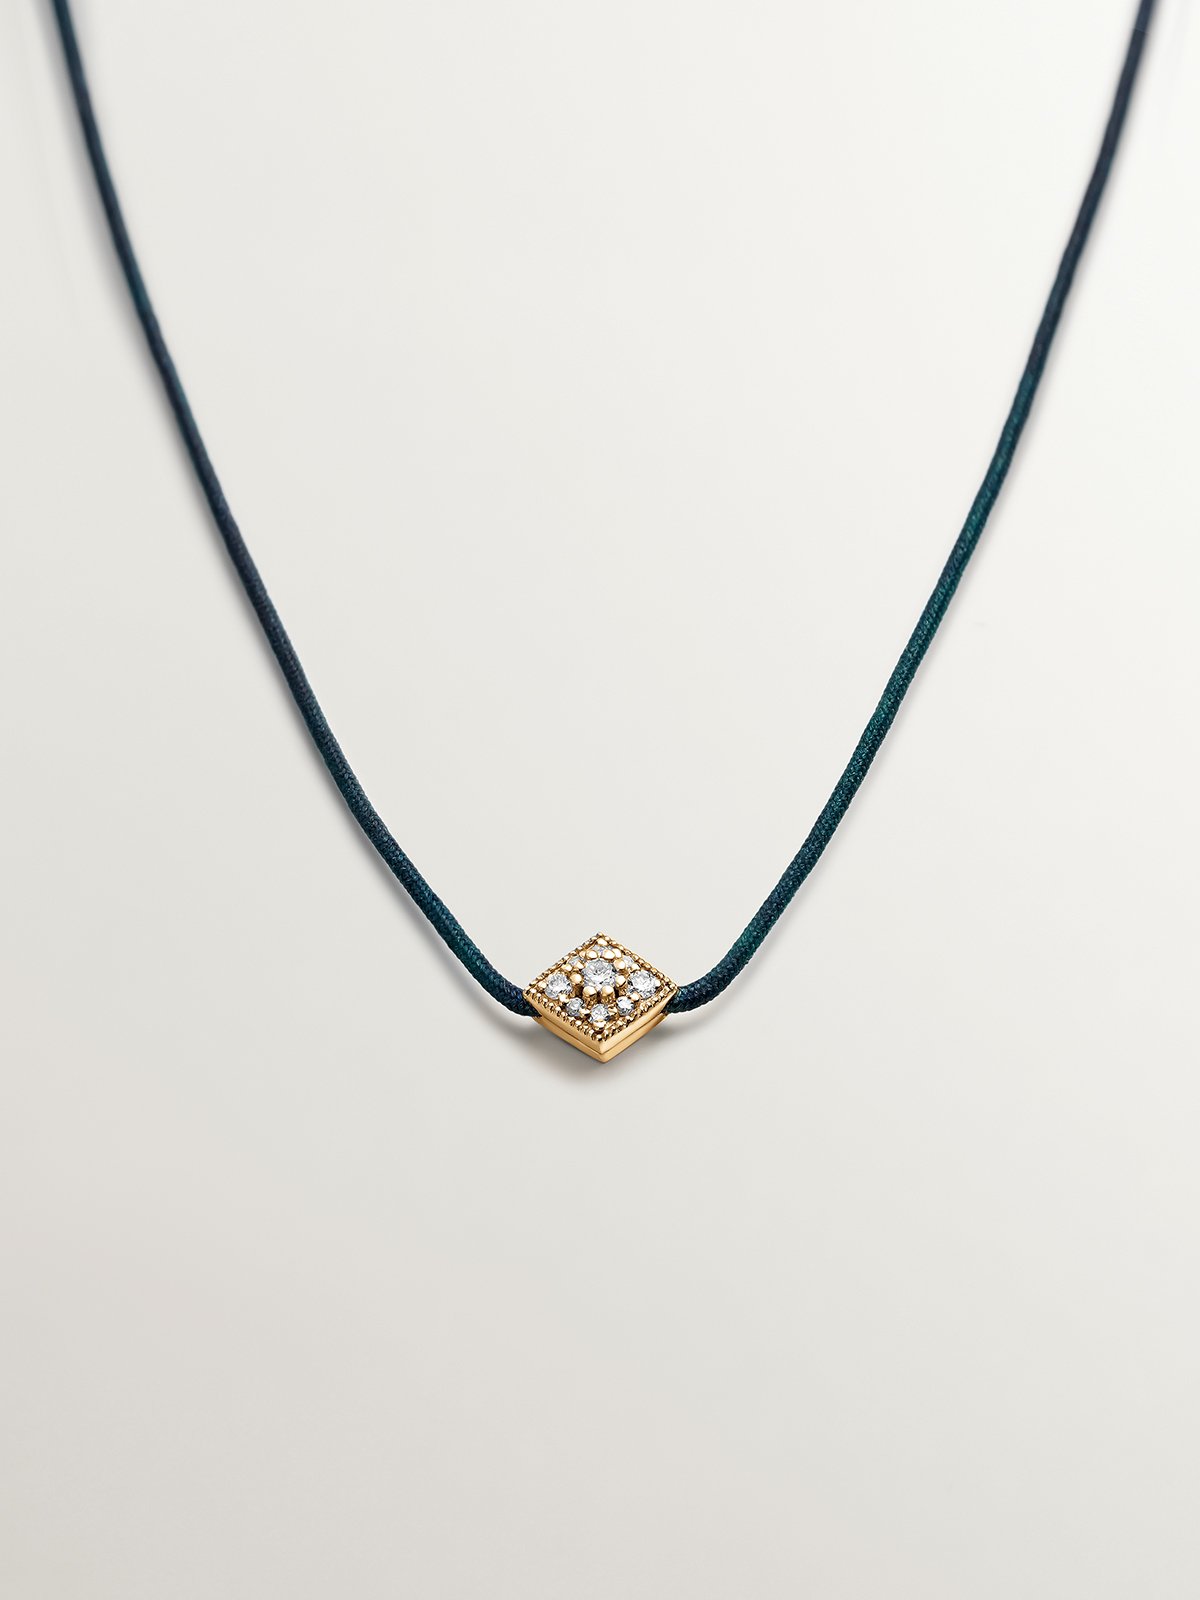 18K yellow gold and thread necklace with diamonds.